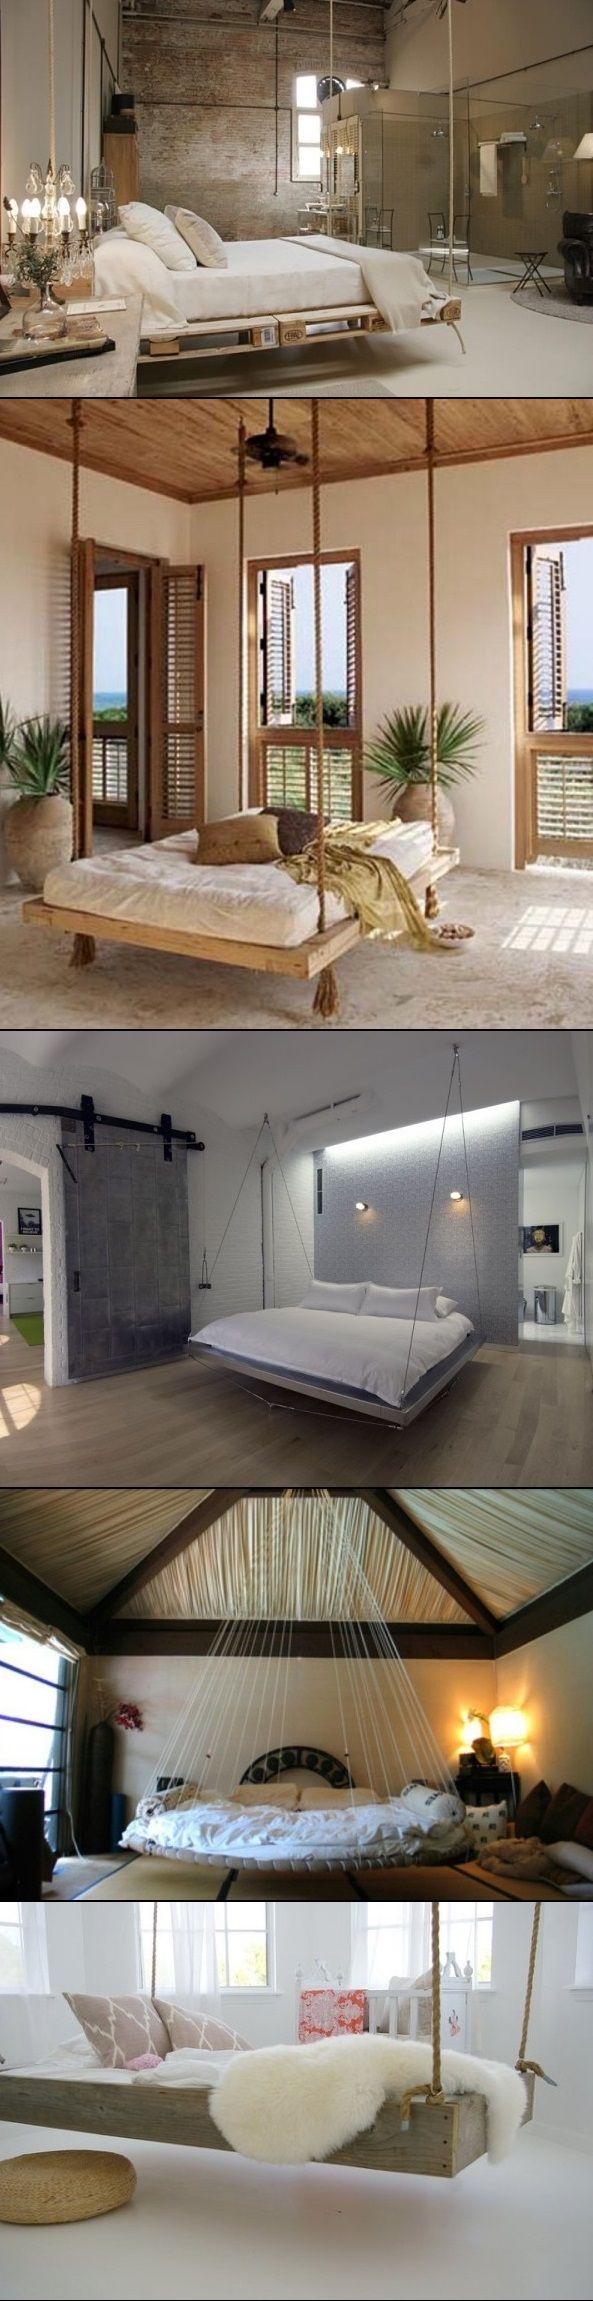 Creatively Recycling Ideas-Top 20 Pallet Beds -homesthetics (18)